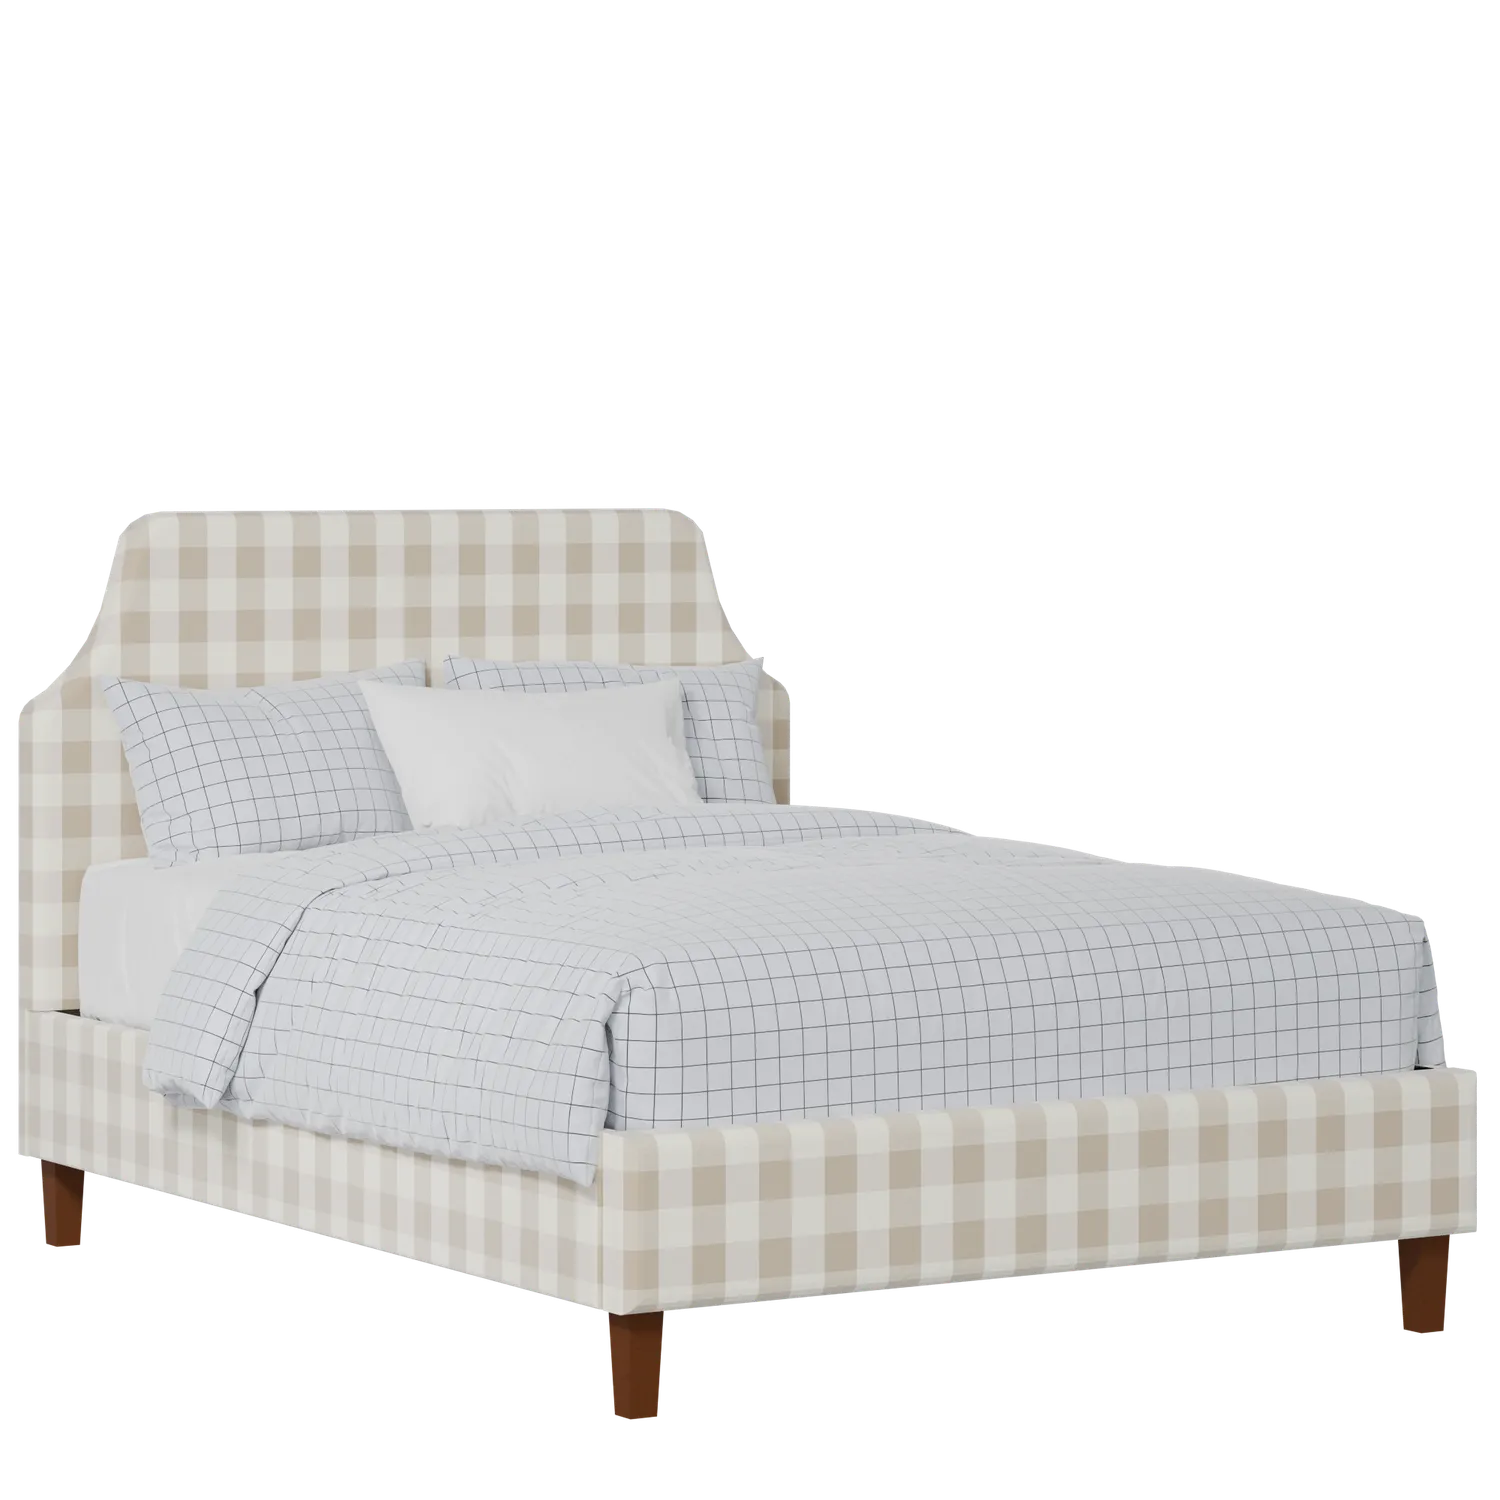 Henley upholstered bed in Romo Kemble Putty fabric with Juno mattress